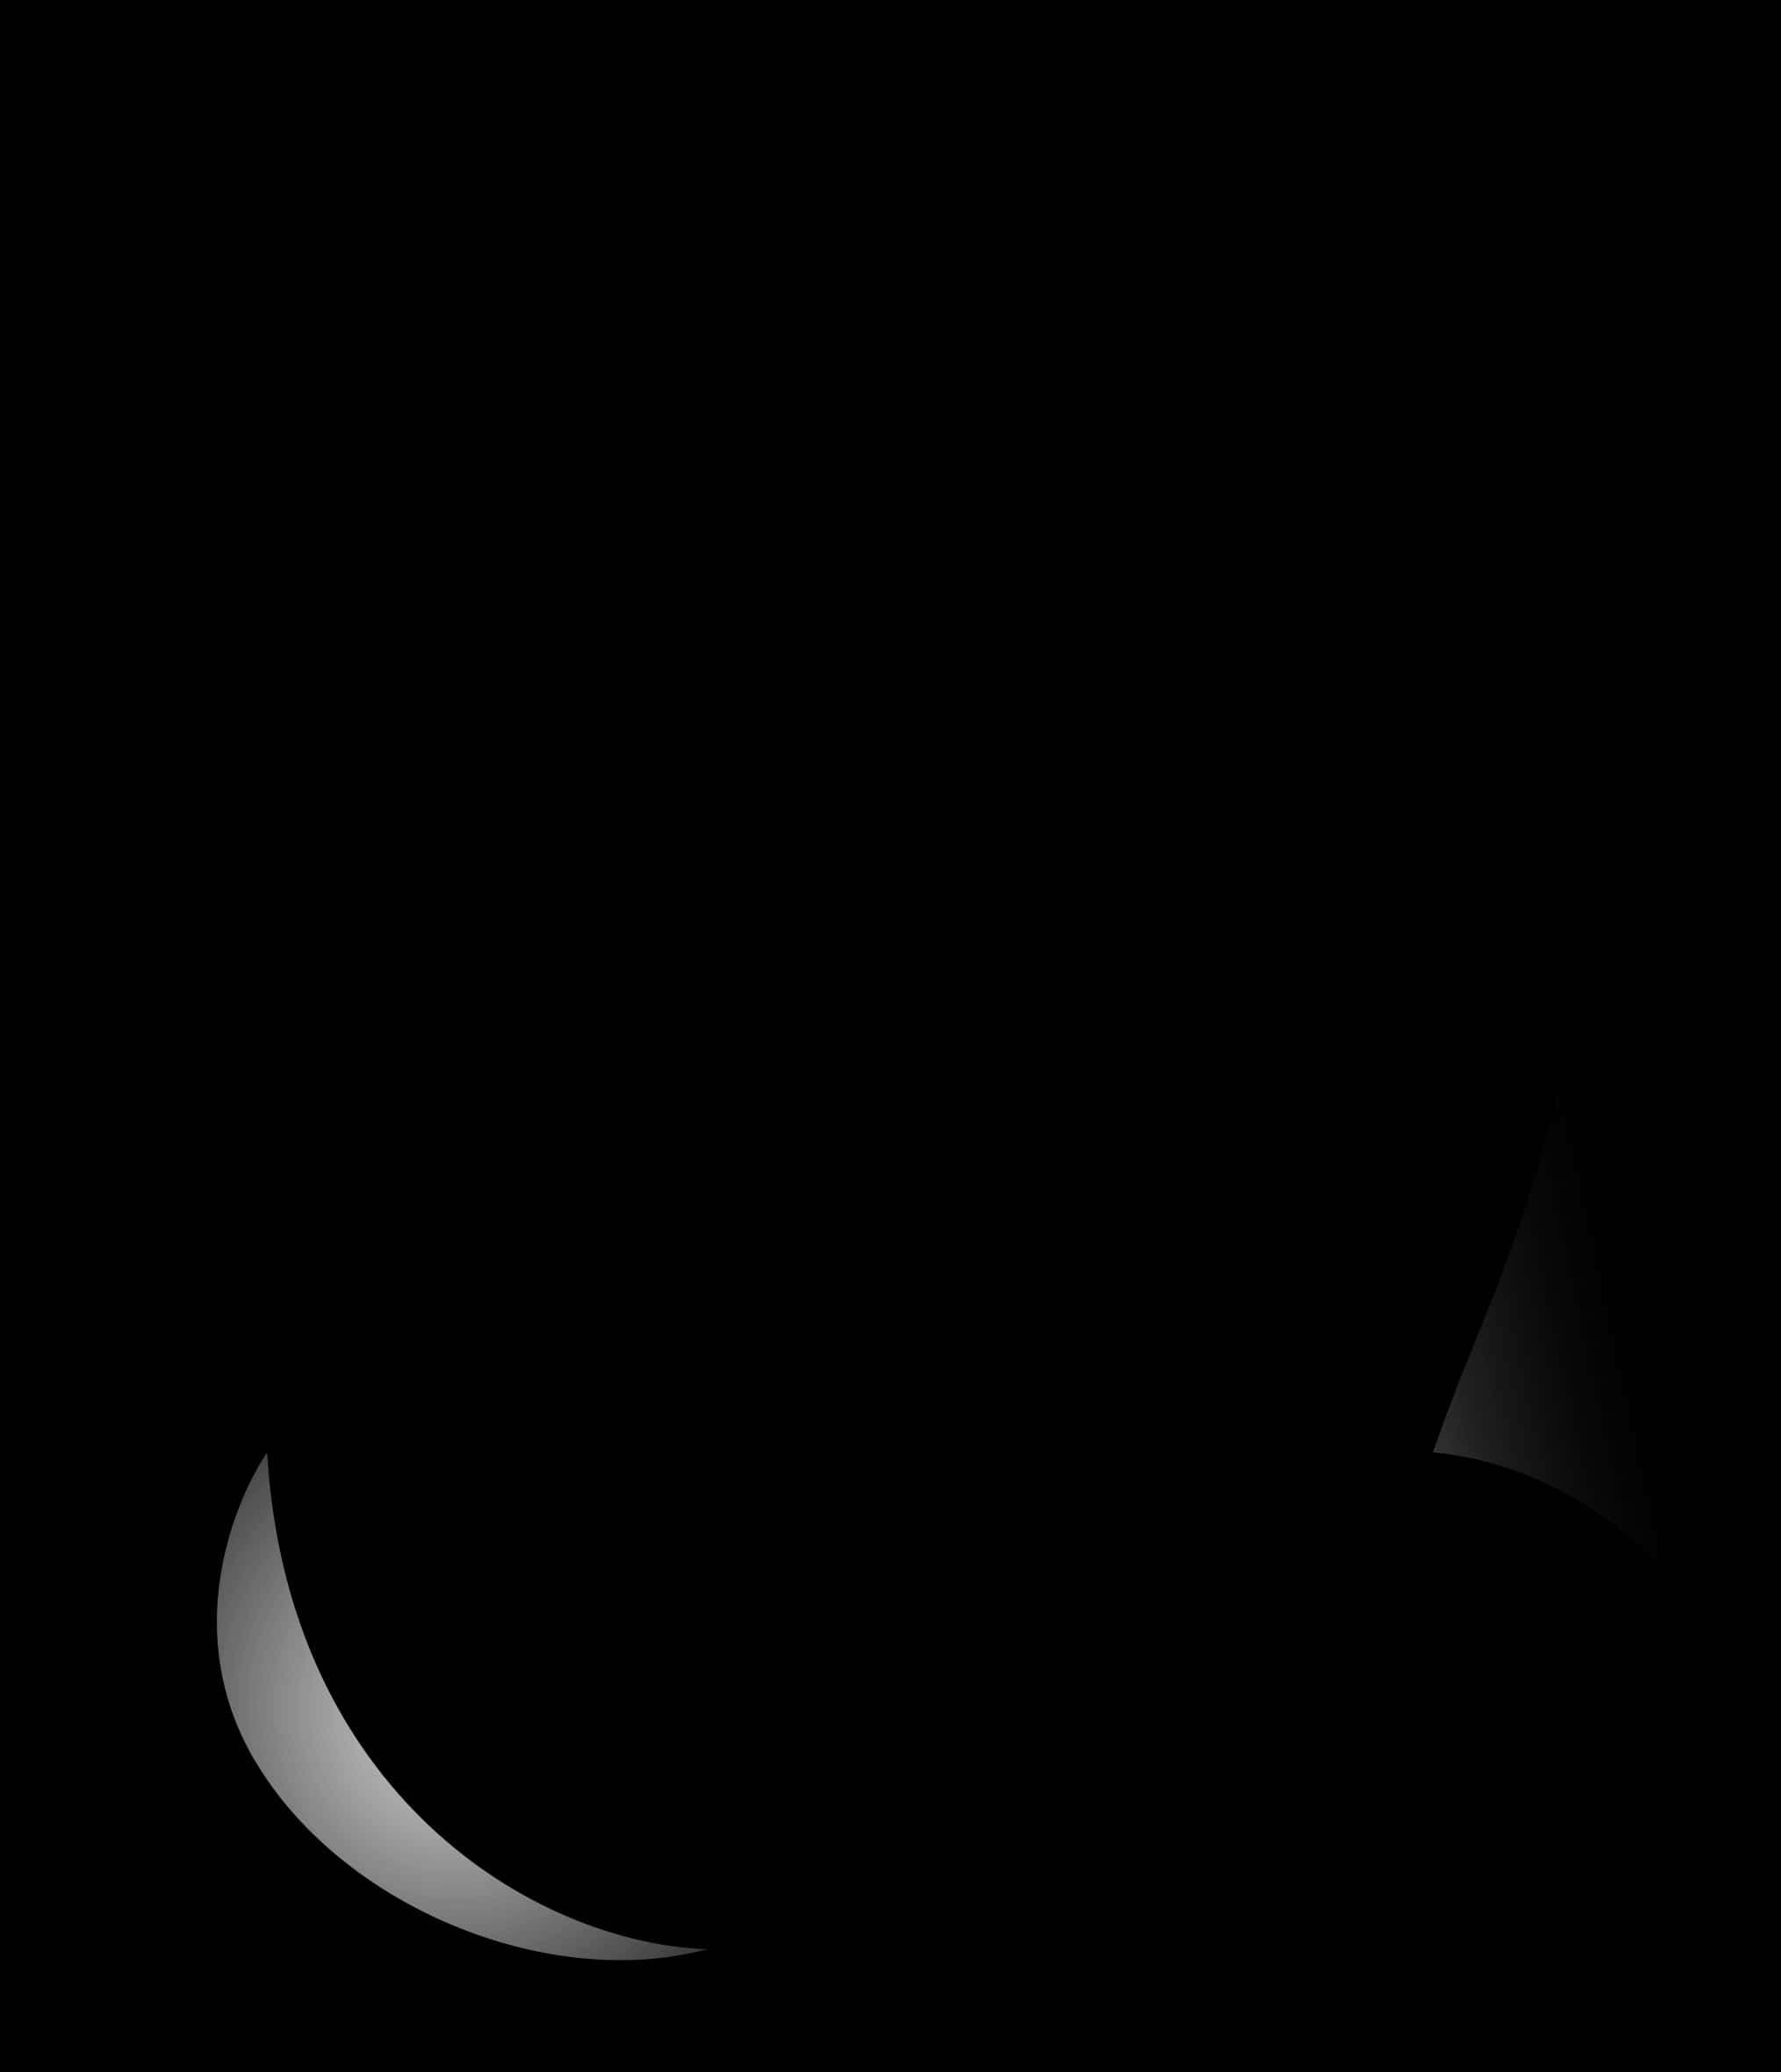 A Crescent Moon In The Dark